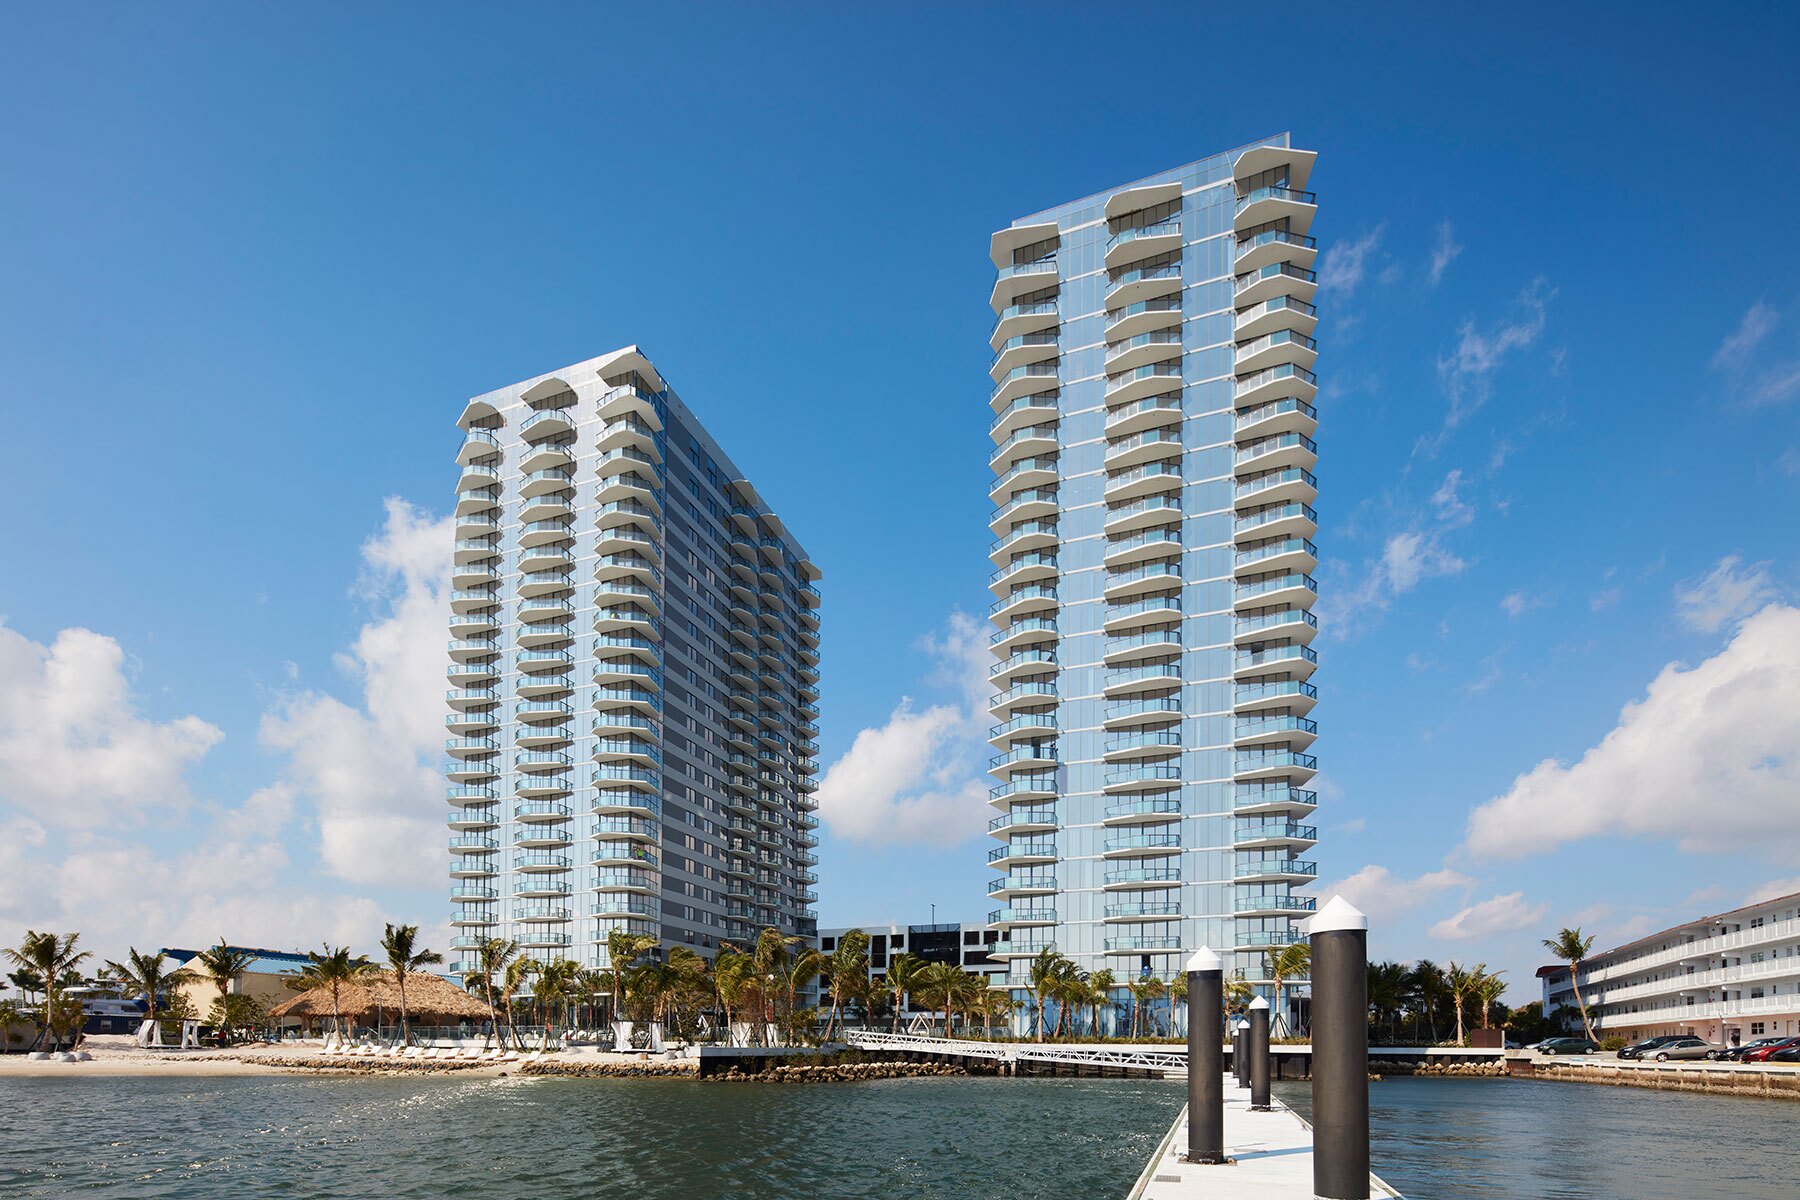 Balconies on Icon Marina Village intentionally designed to give the appearance of wind in sails. (Dana Hoff for CoStar)